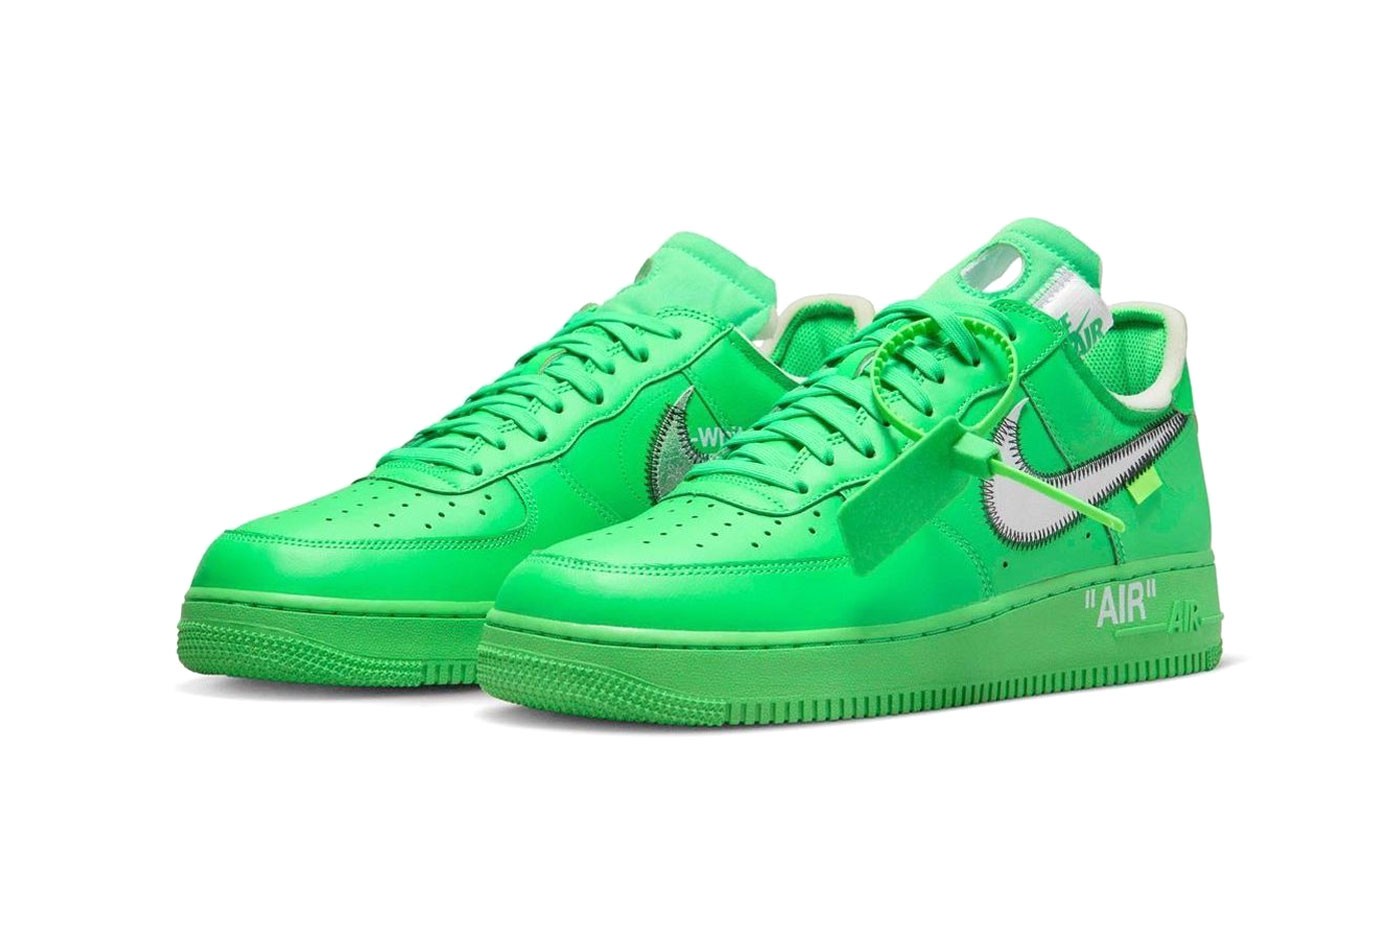 The Off-White™ x Nike Air Force 1 Low “Brooklyn” To Drop